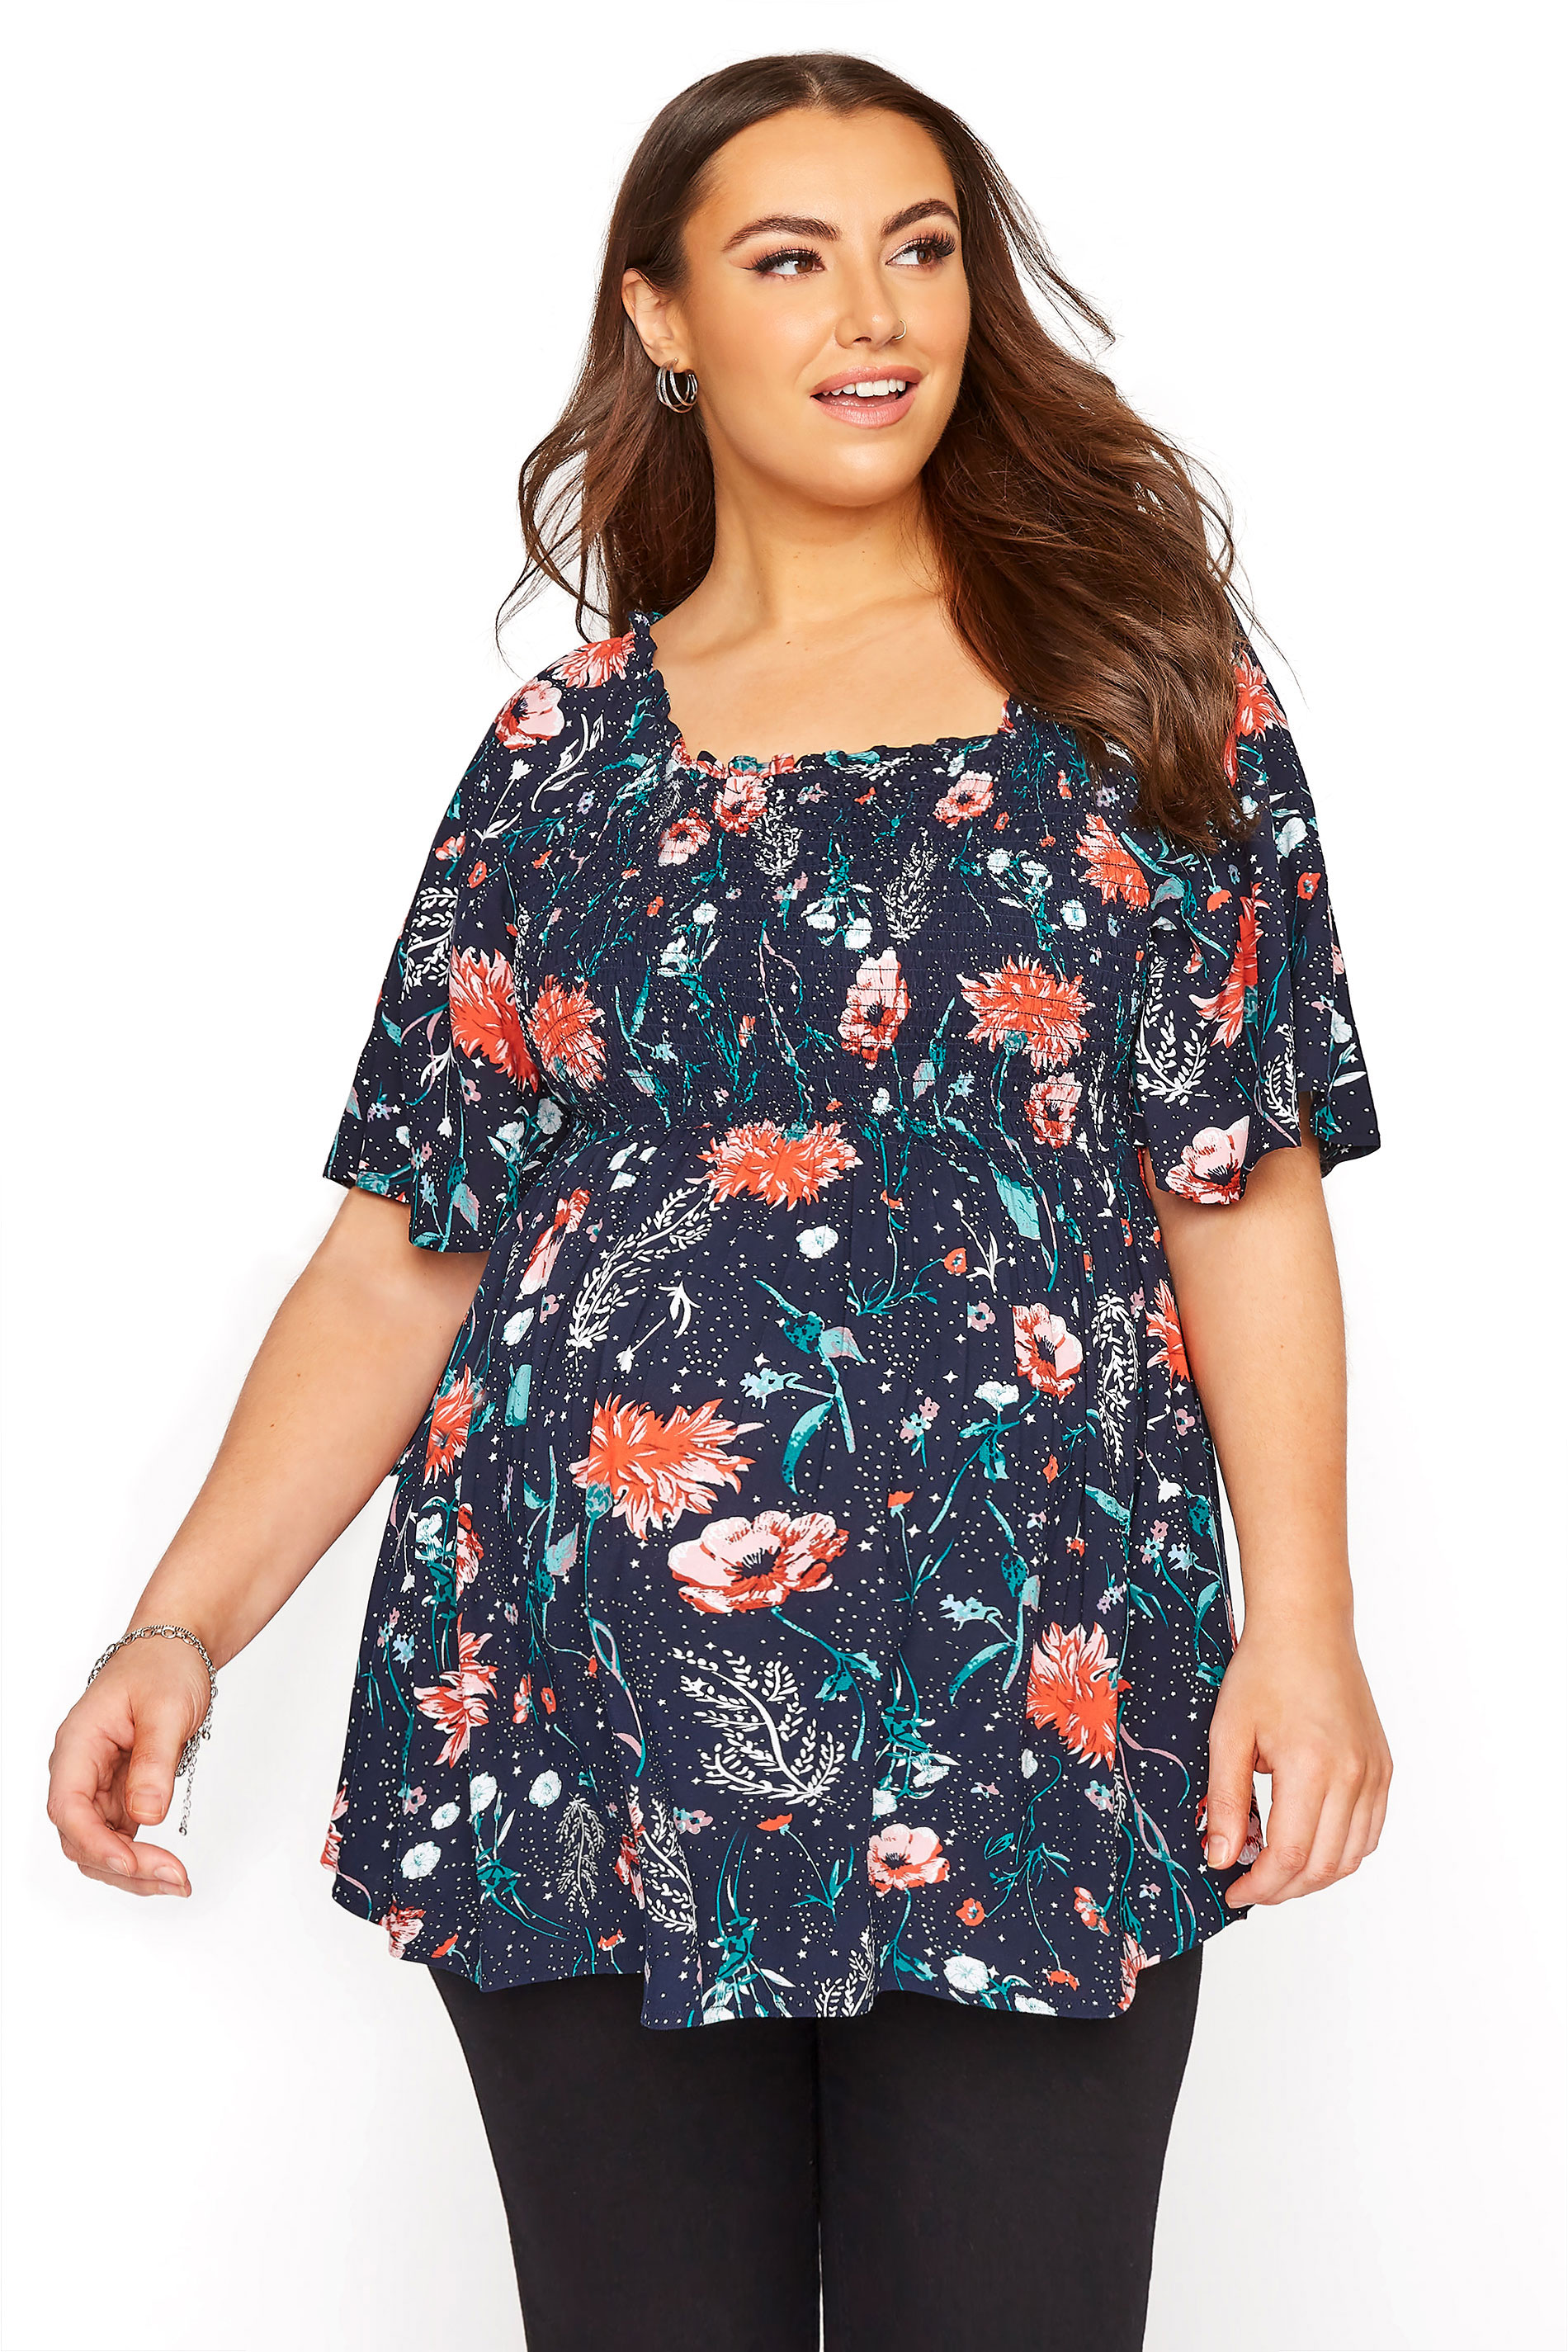 BUMP IT UP MATERNITY Navy Floral Shirred Bodice Top